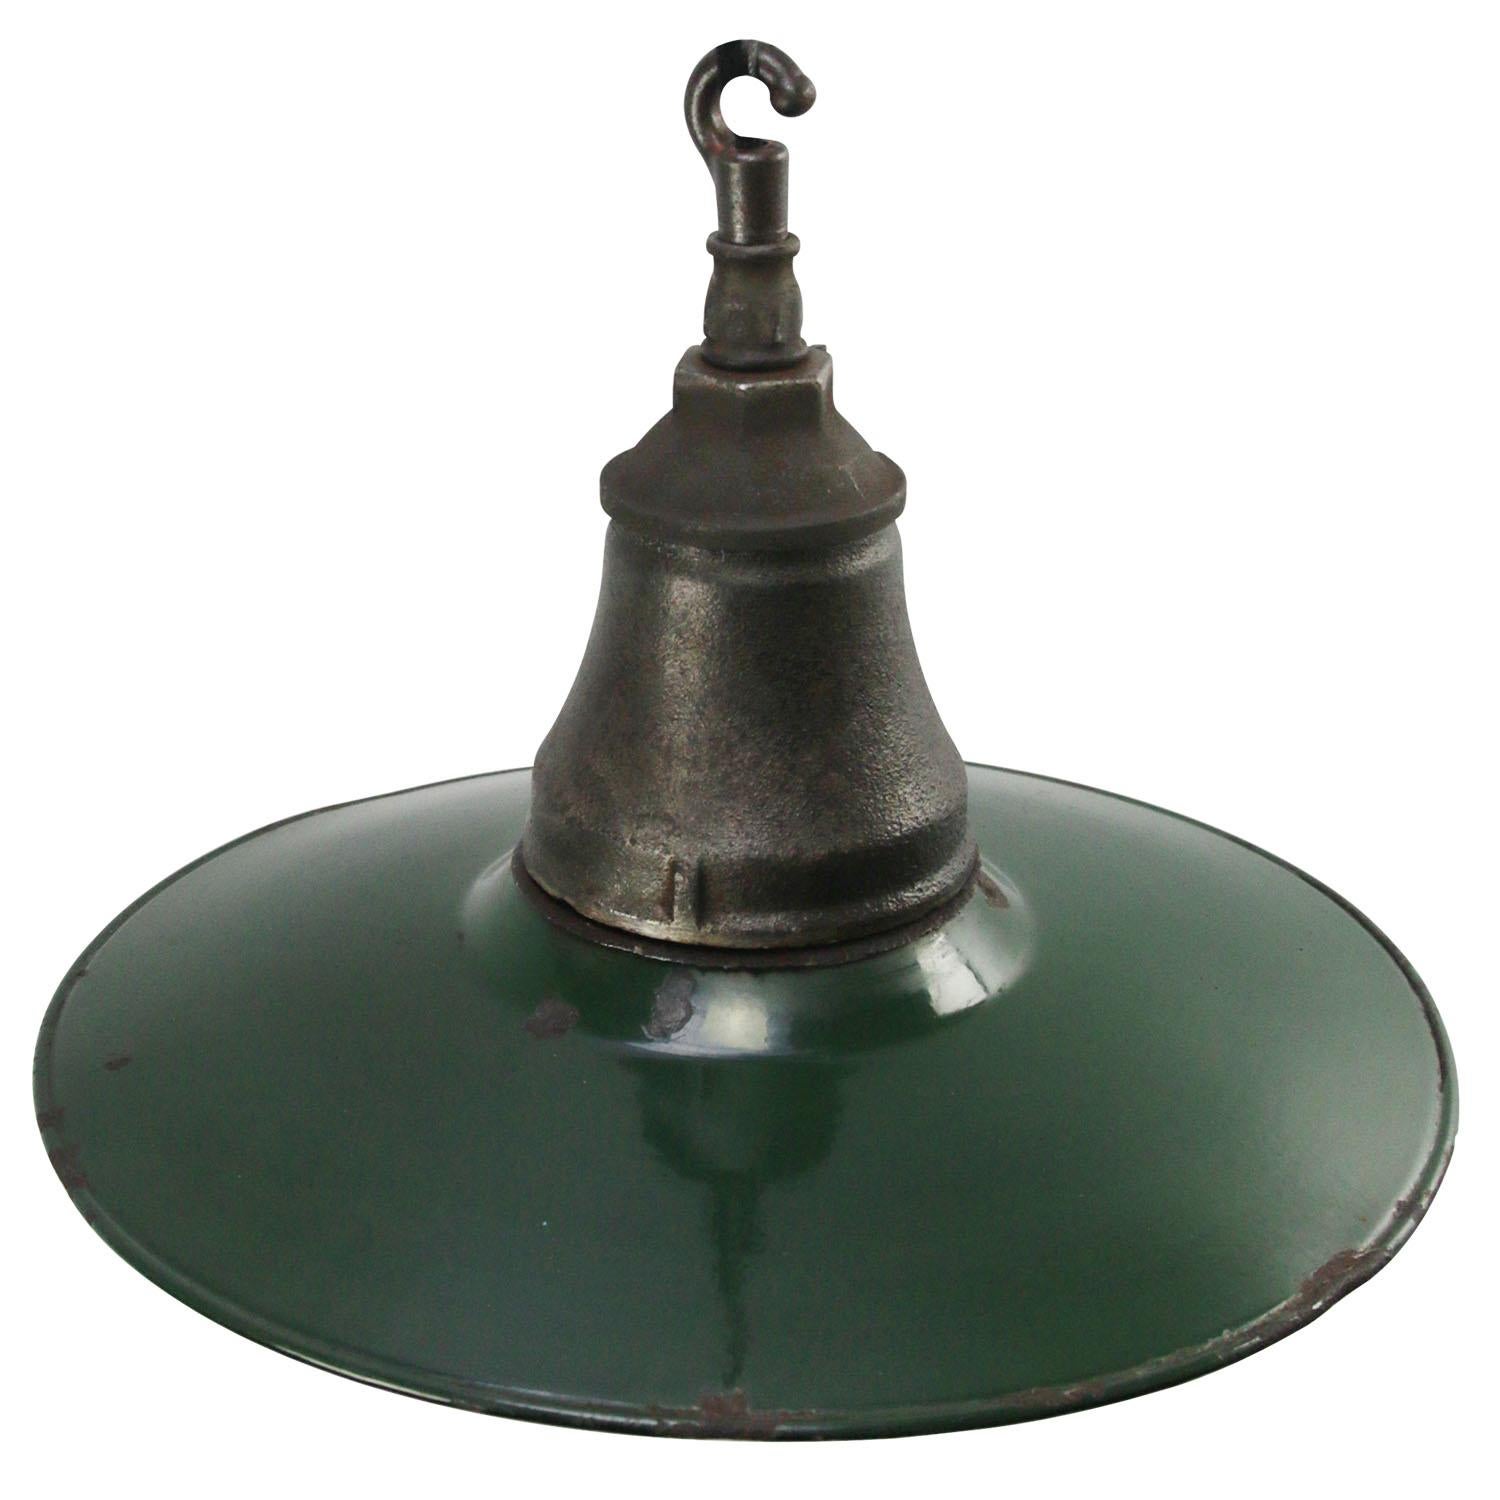 American industrial factory pendant light
Green enamel white interior.
Cast iron top

Weight 3.25 kg / 7.2 lb

Priced per individual item. All lamps have been made suitable by international standards for incandescent light bulbs,